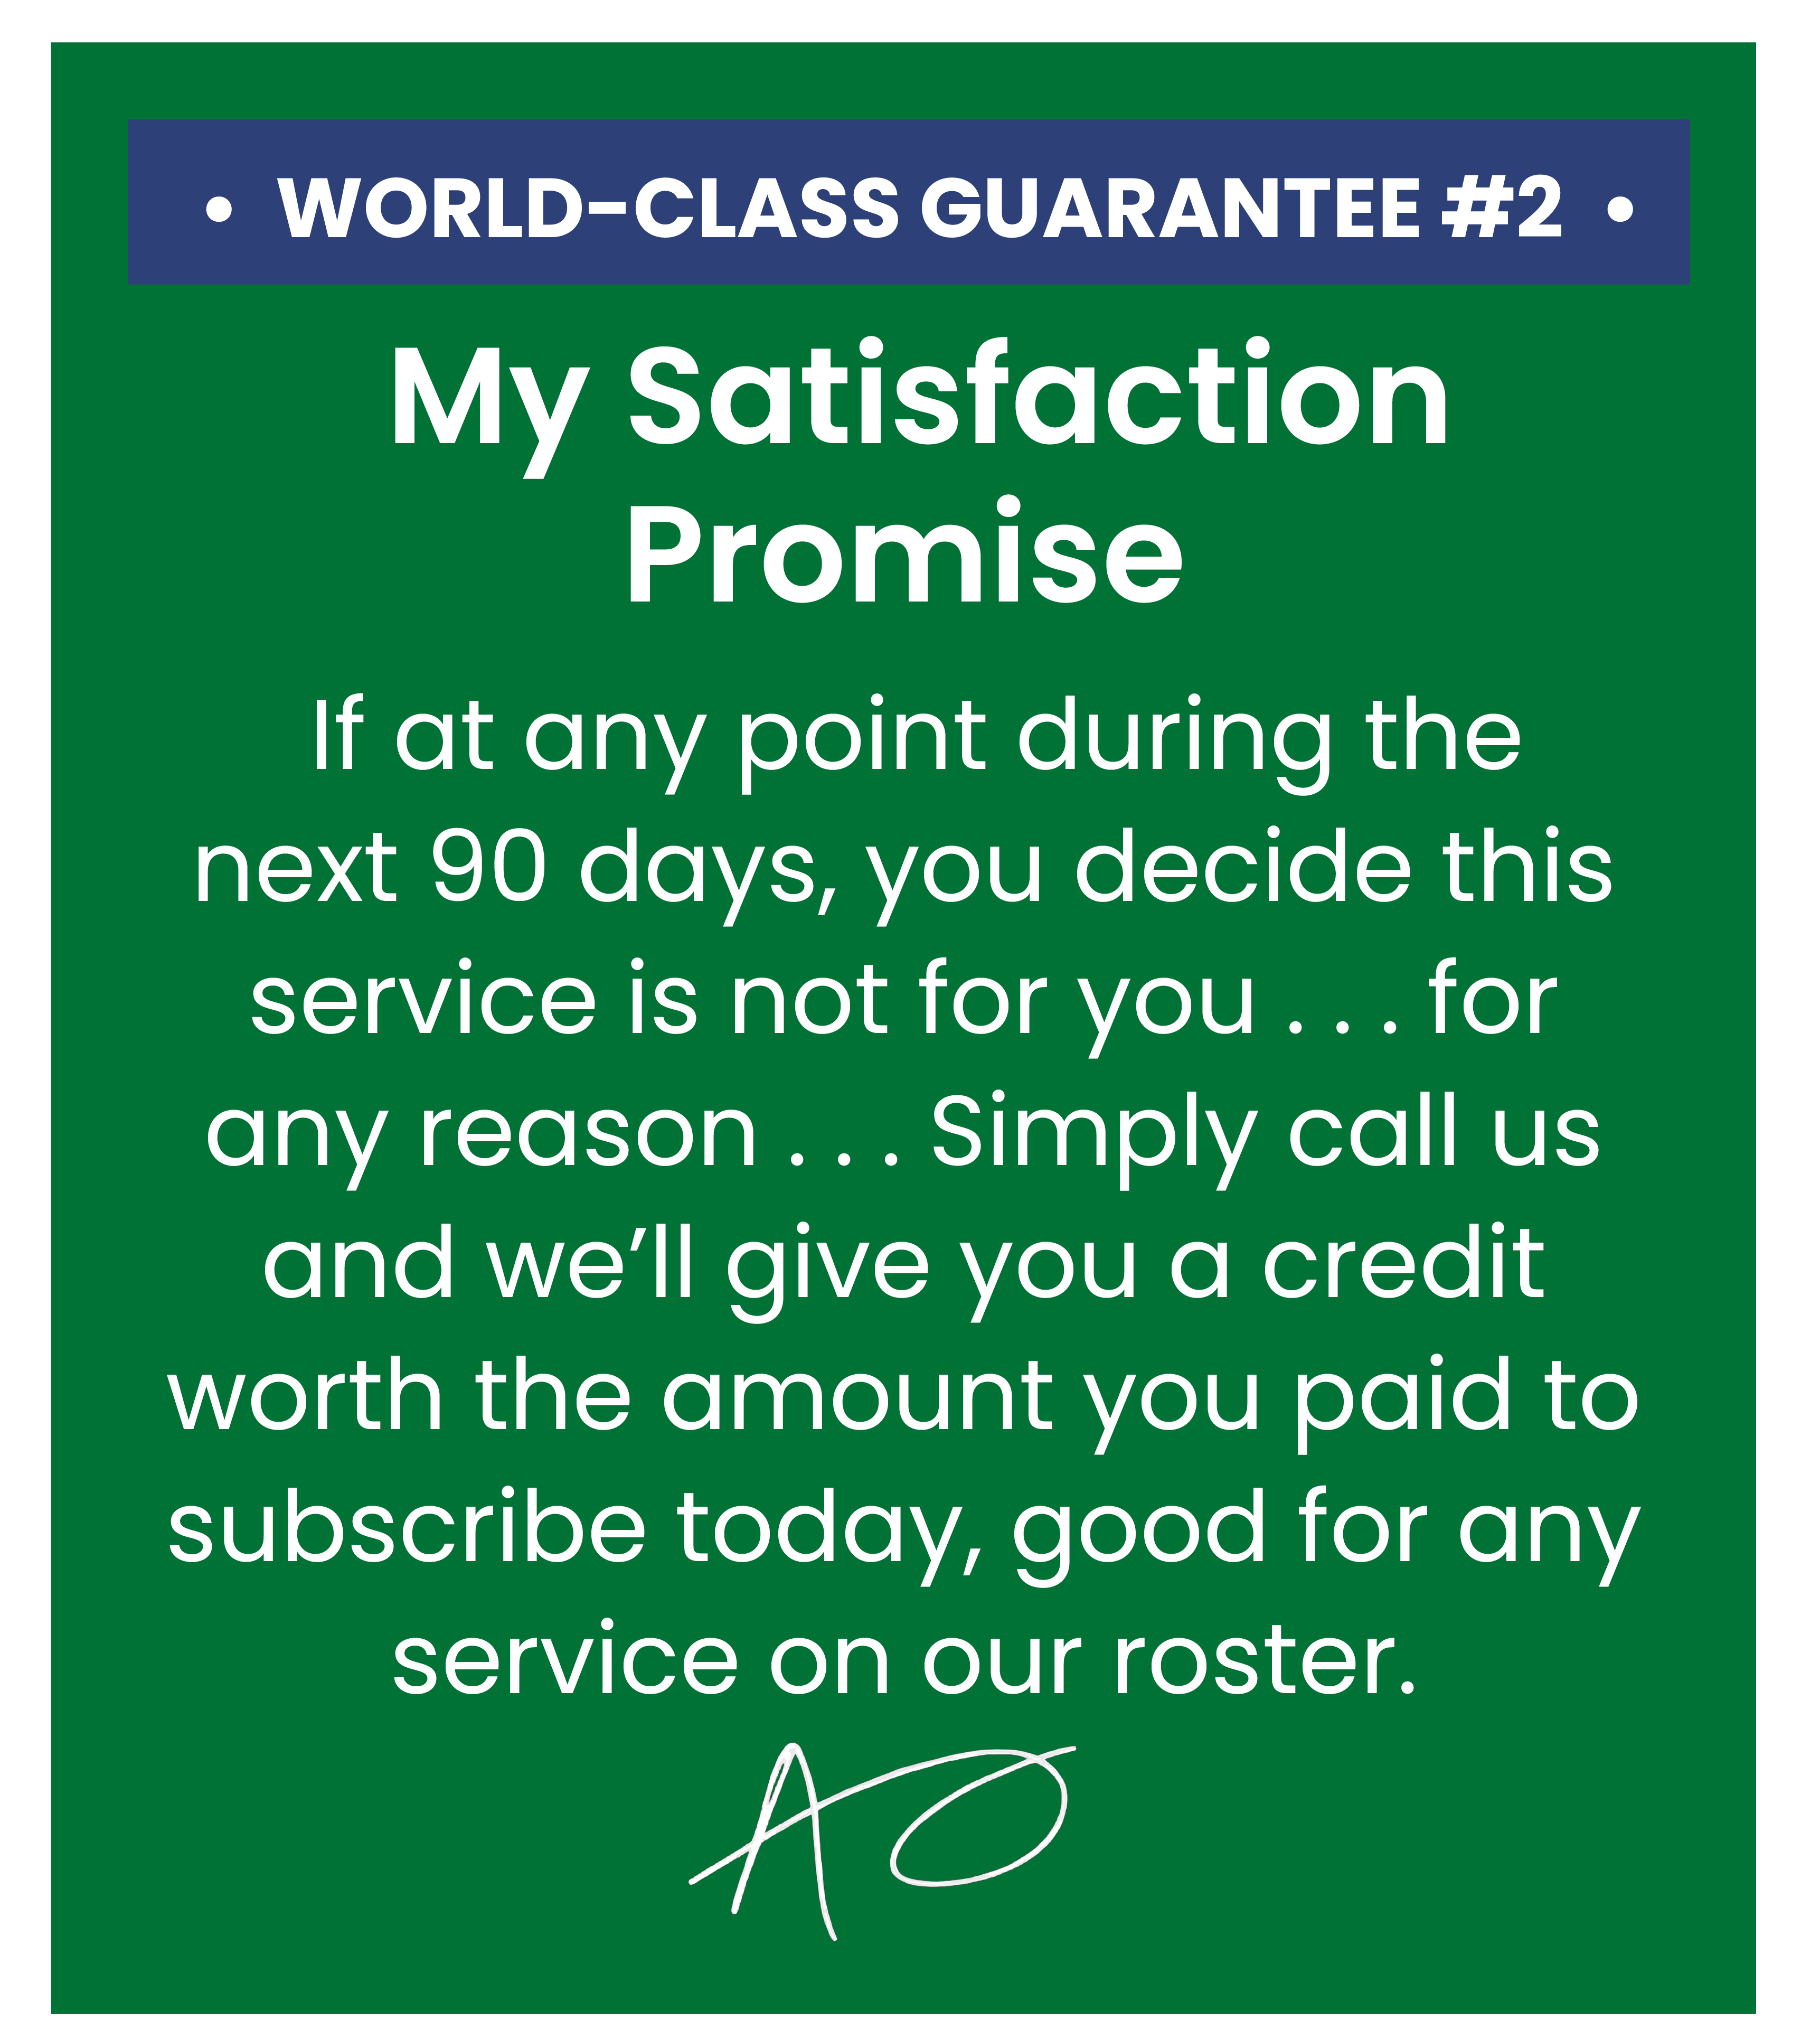 Adam's satisfaction guarantee or an account credit during the next 90 days.